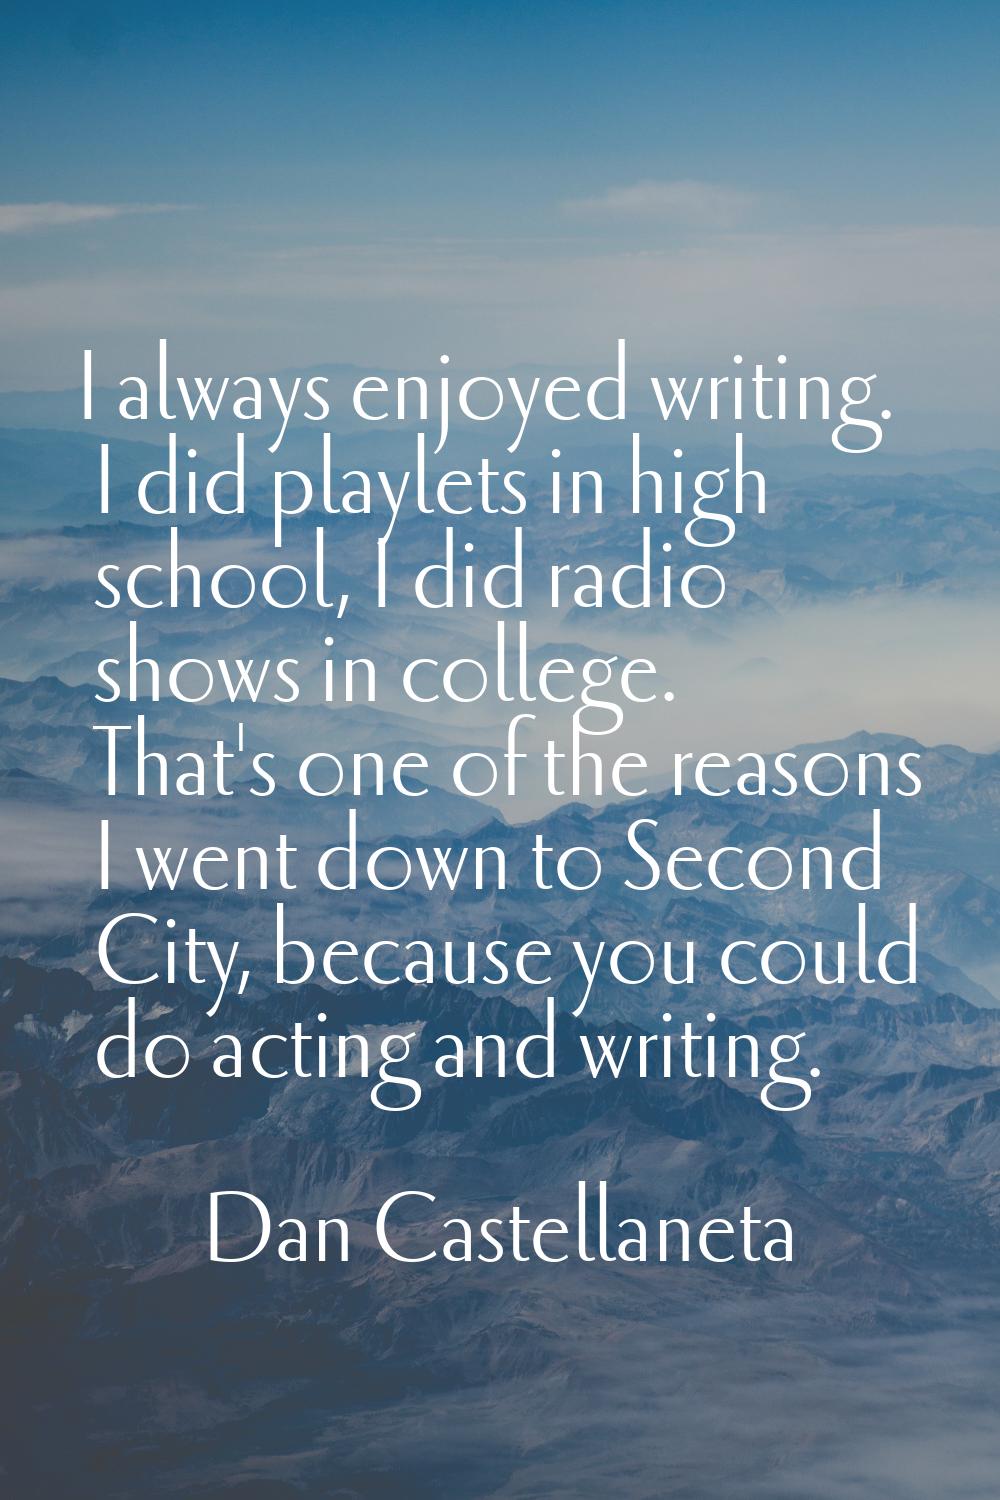 I always enjoyed writing. I did playlets in high school, I did radio shows in college. That's one o